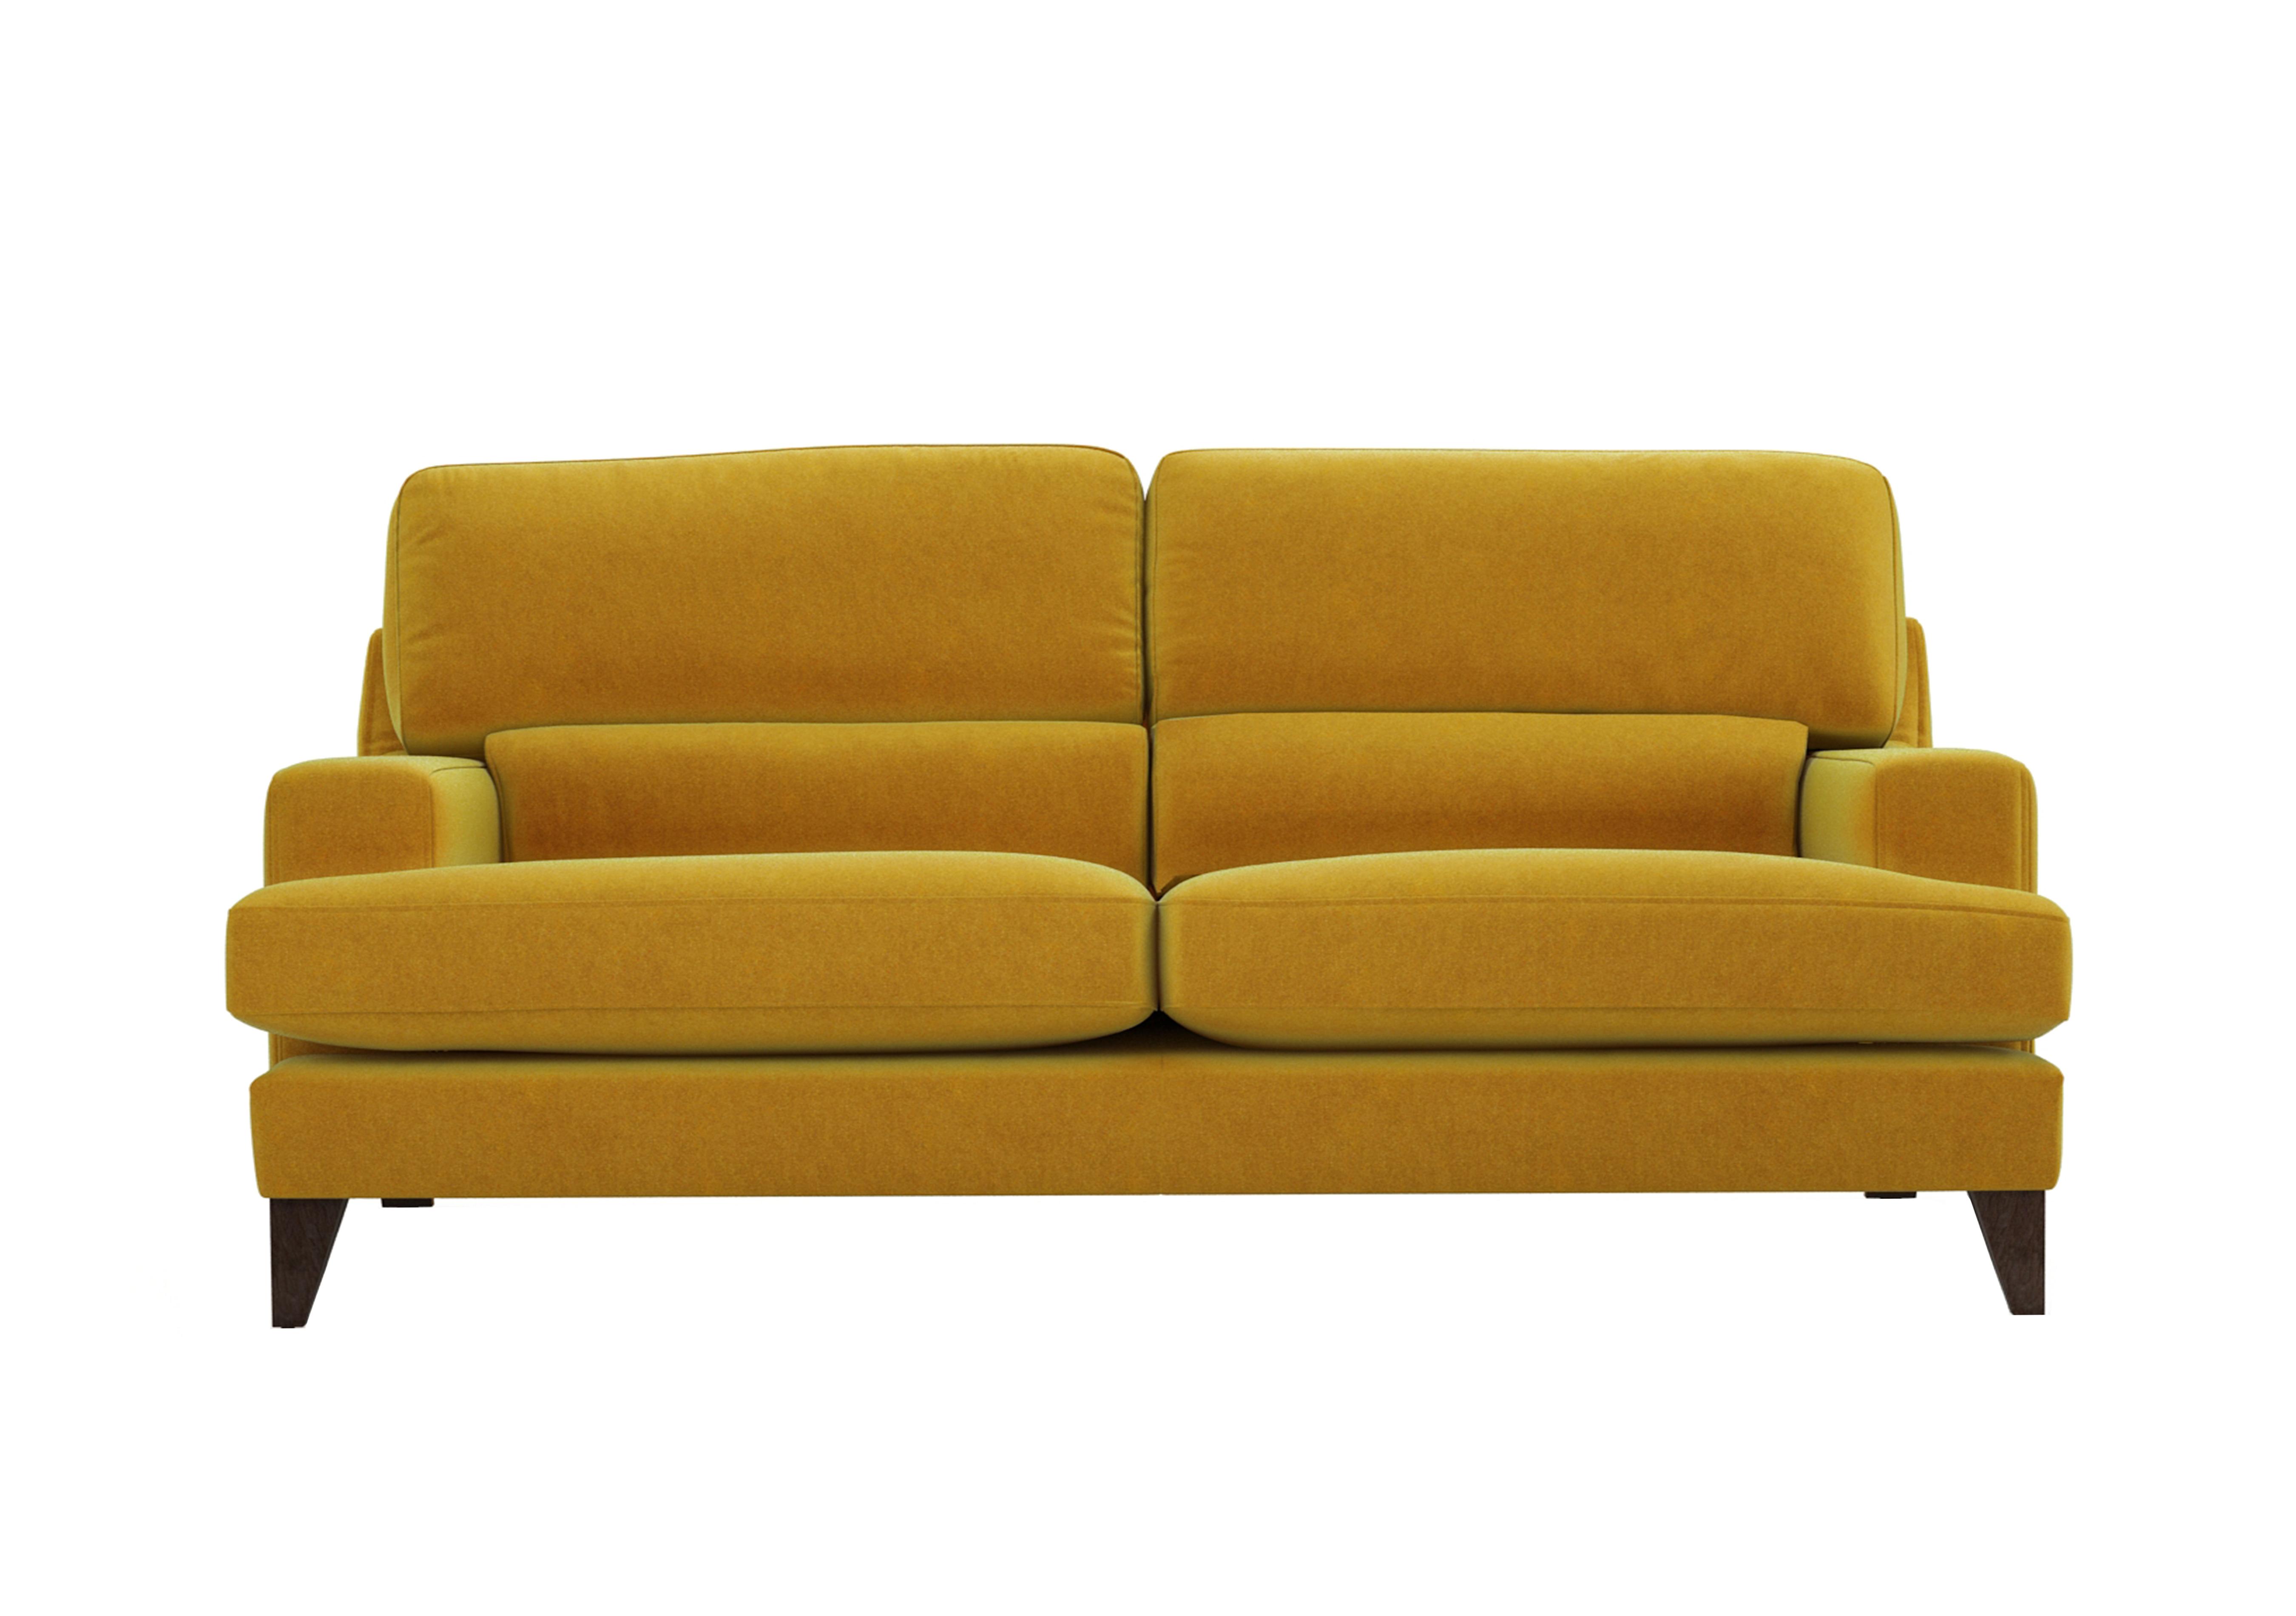 Romilly 3 Seater Fabric Sofa in Gol204 Golden Spice Wa Ft on Furniture Village